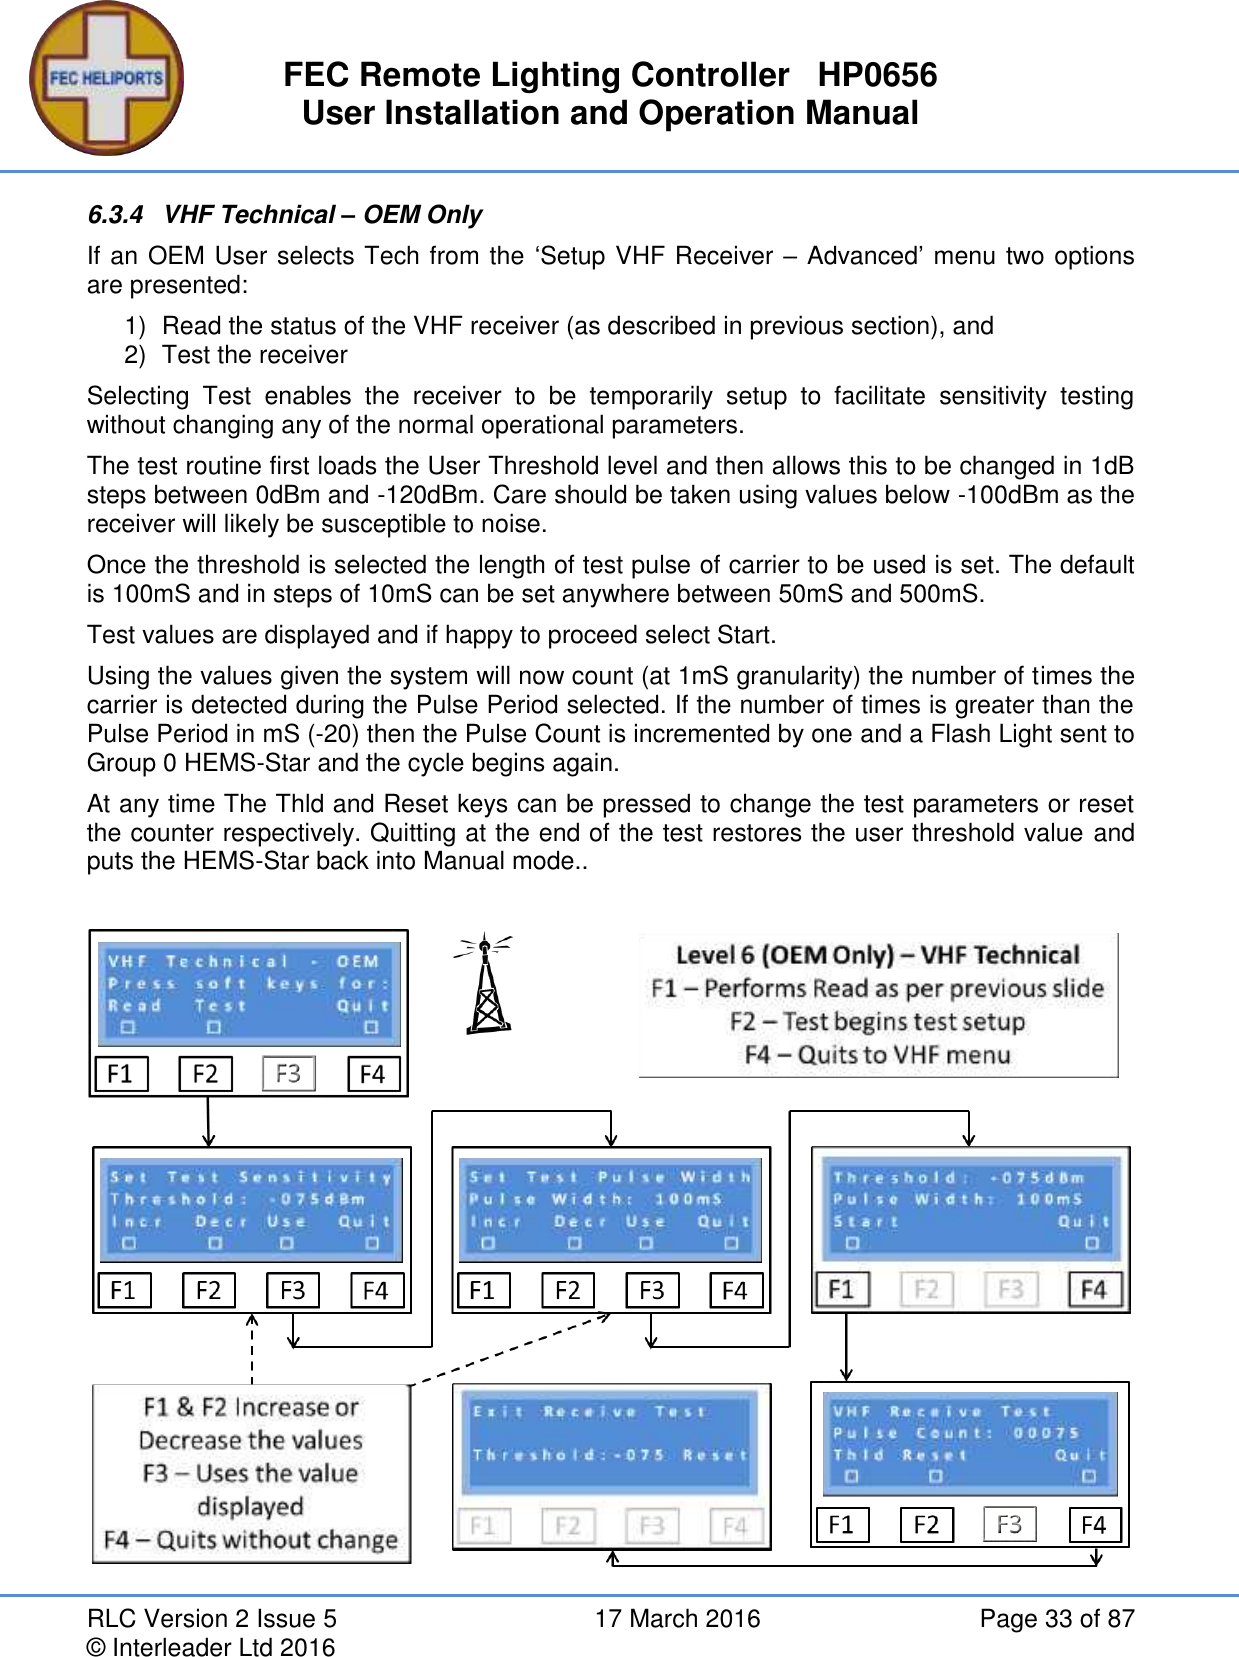 FEC Remote Lighting Controller   HP0656 User Installation and Operation Manual RLC Version 2 Issue 5  17 March 2016  Page 33 of 87 © Interleader Ltd 2016 6.3.4  VHF Technical – OEM Only If an OEM User selects Tech from the ‘Setup VHF Receiver – Advanced’ menu two options are presented: 1)  Read the status of the VHF receiver (as described in previous section), and 2)  Test the receiver Selecting  Test  enables  the  receiver  to  be  temporarily  setup  to  facilitate  sensitivity  testing without changing any of the normal operational parameters. The test routine first loads the User Threshold level and then allows this to be changed in 1dB steps between 0dBm and -120dBm. Care should be taken using values below -100dBm as the receiver will likely be susceptible to noise. Once the threshold is selected the length of test pulse of carrier to be used is set. The default is 100mS and in steps of 10mS can be set anywhere between 50mS and 500mS. Test values are displayed and if happy to proceed select Start. Using the values given the system will now count (at 1mS granularity) the number of times the carrier is detected during the Pulse Period selected. If the number of times is greater than the Pulse Period in mS (-20) then the Pulse Count is incremented by one and a Flash Light sent to Group 0 HEMS-Star and the cycle begins again. At any time The Thld and Reset keys can be pressed to change the test parameters or reset the counter respectively. Quitting at the end of the test restores the user threshold value and puts the HEMS-Star back into Manual mode..     